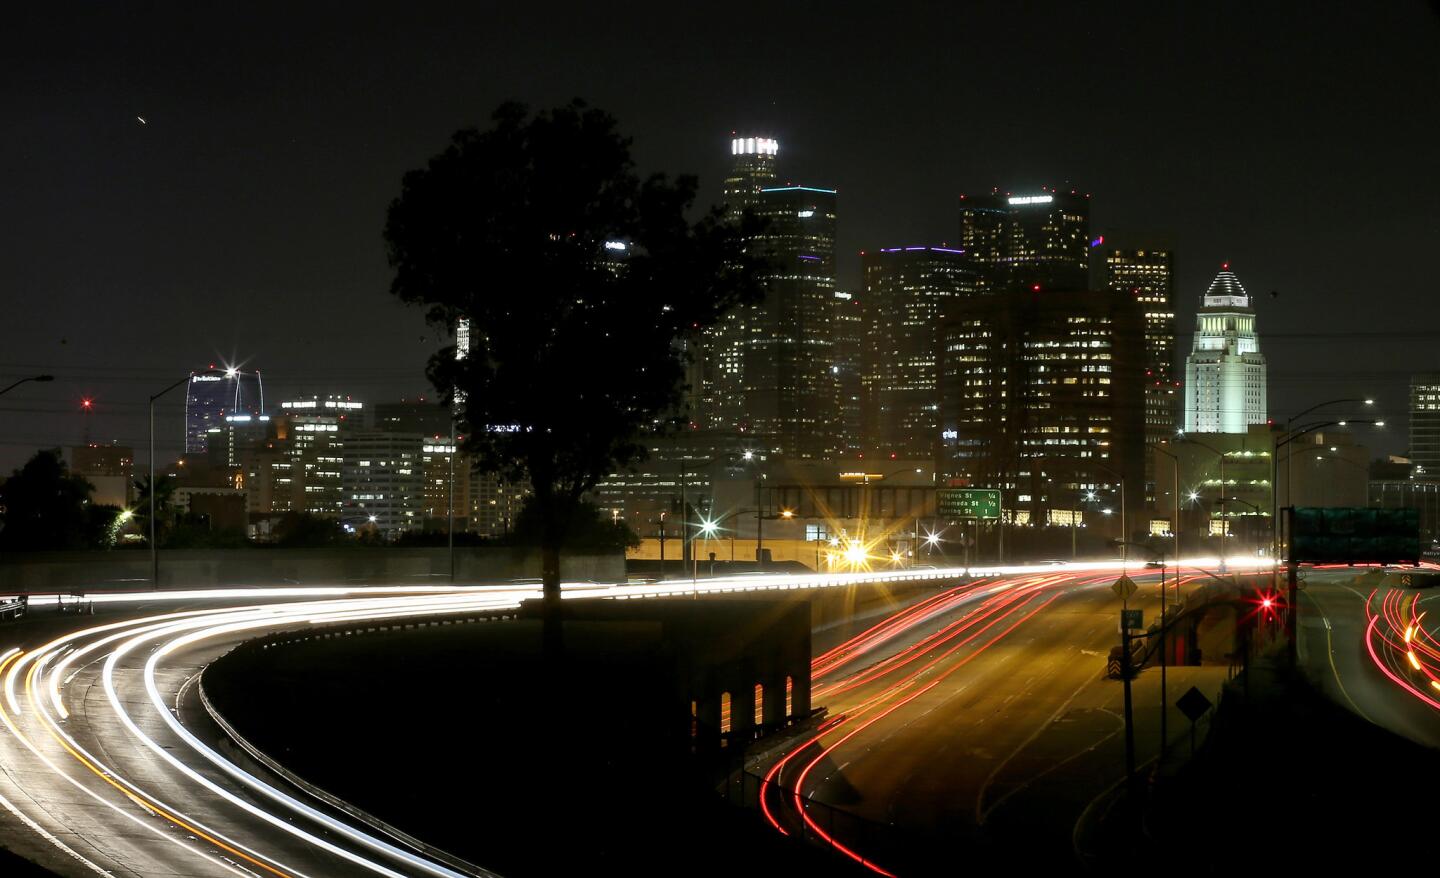 Framed by the streaming lights of passing motorists, a tree grows in a median where freeways meet east of downtown Los Angeles.